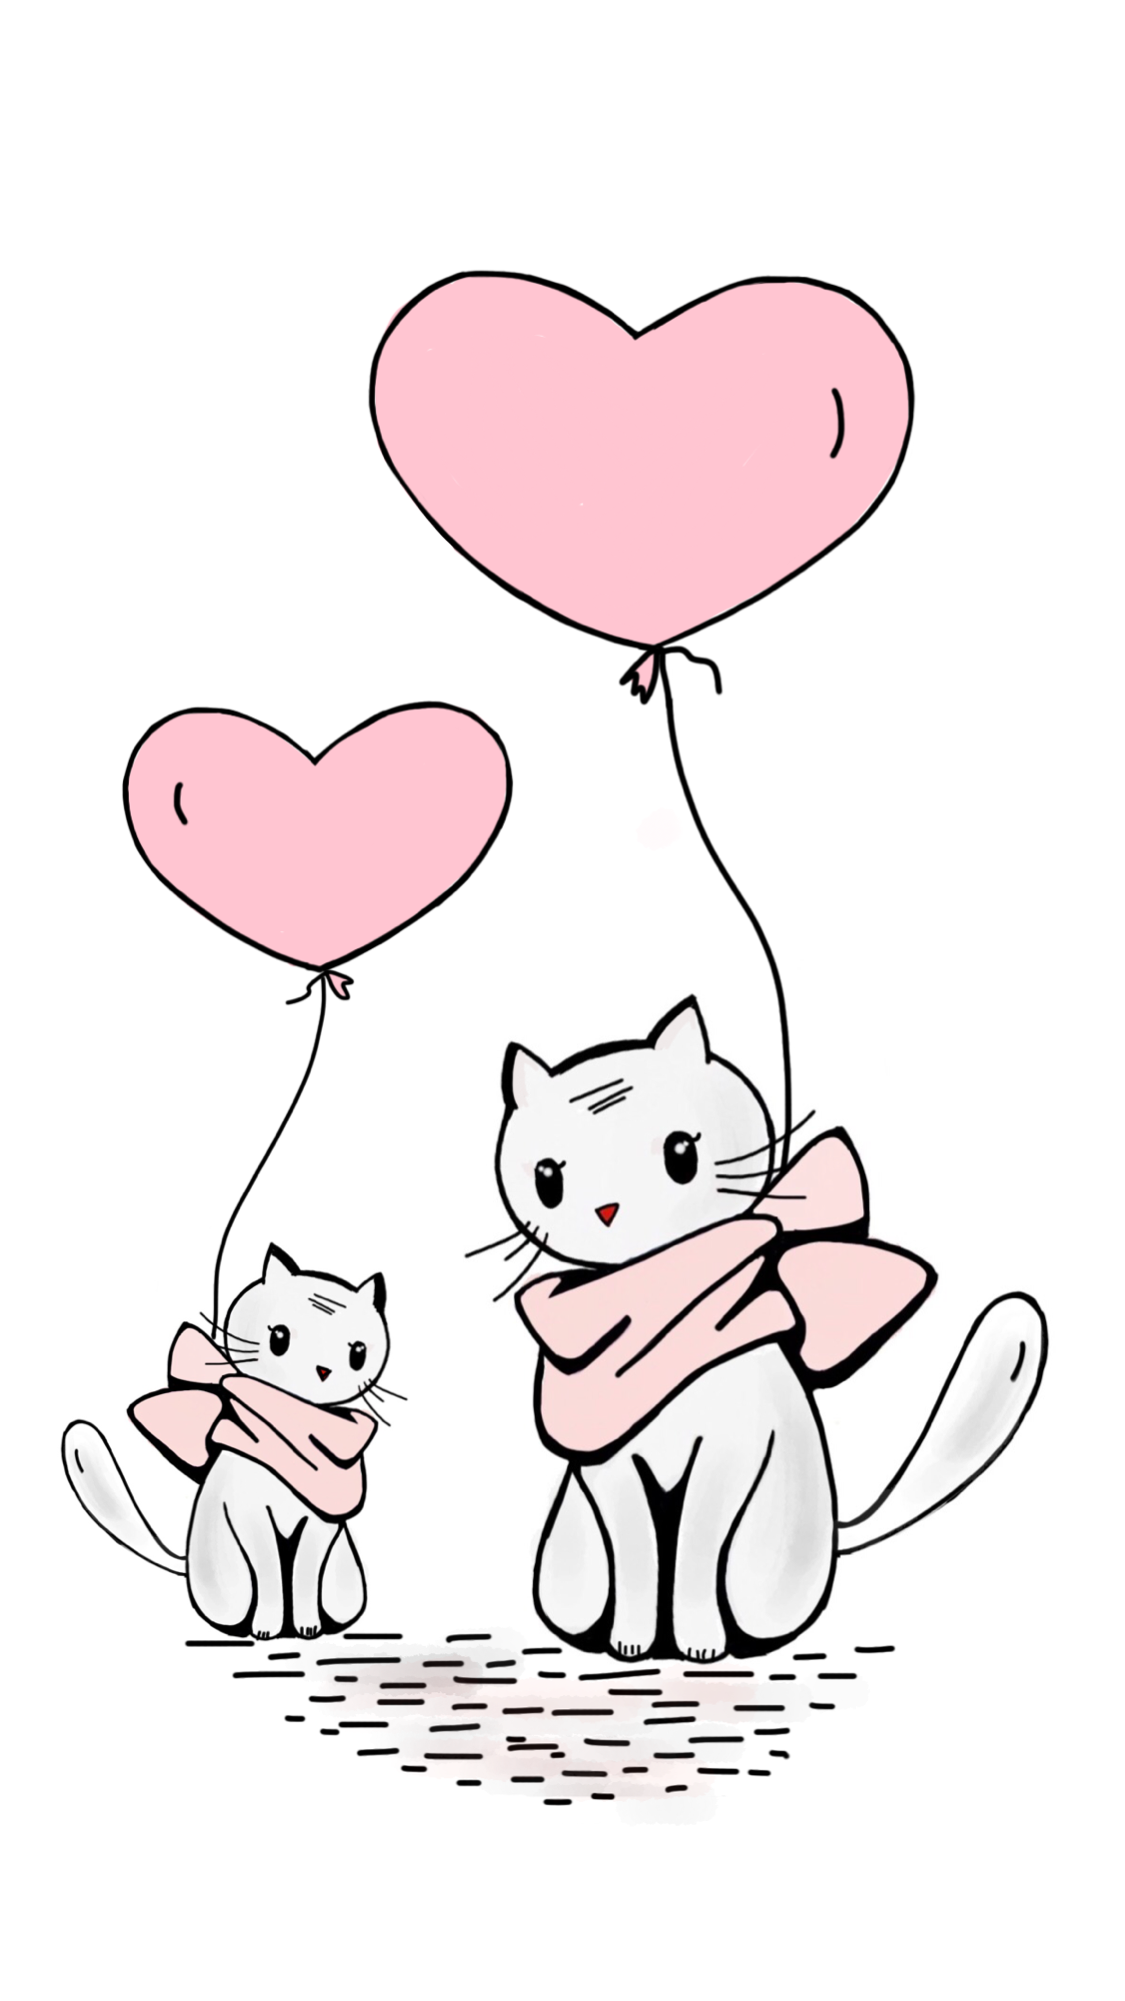 Cartoon cat and kitten with heart shaped balloons free image download